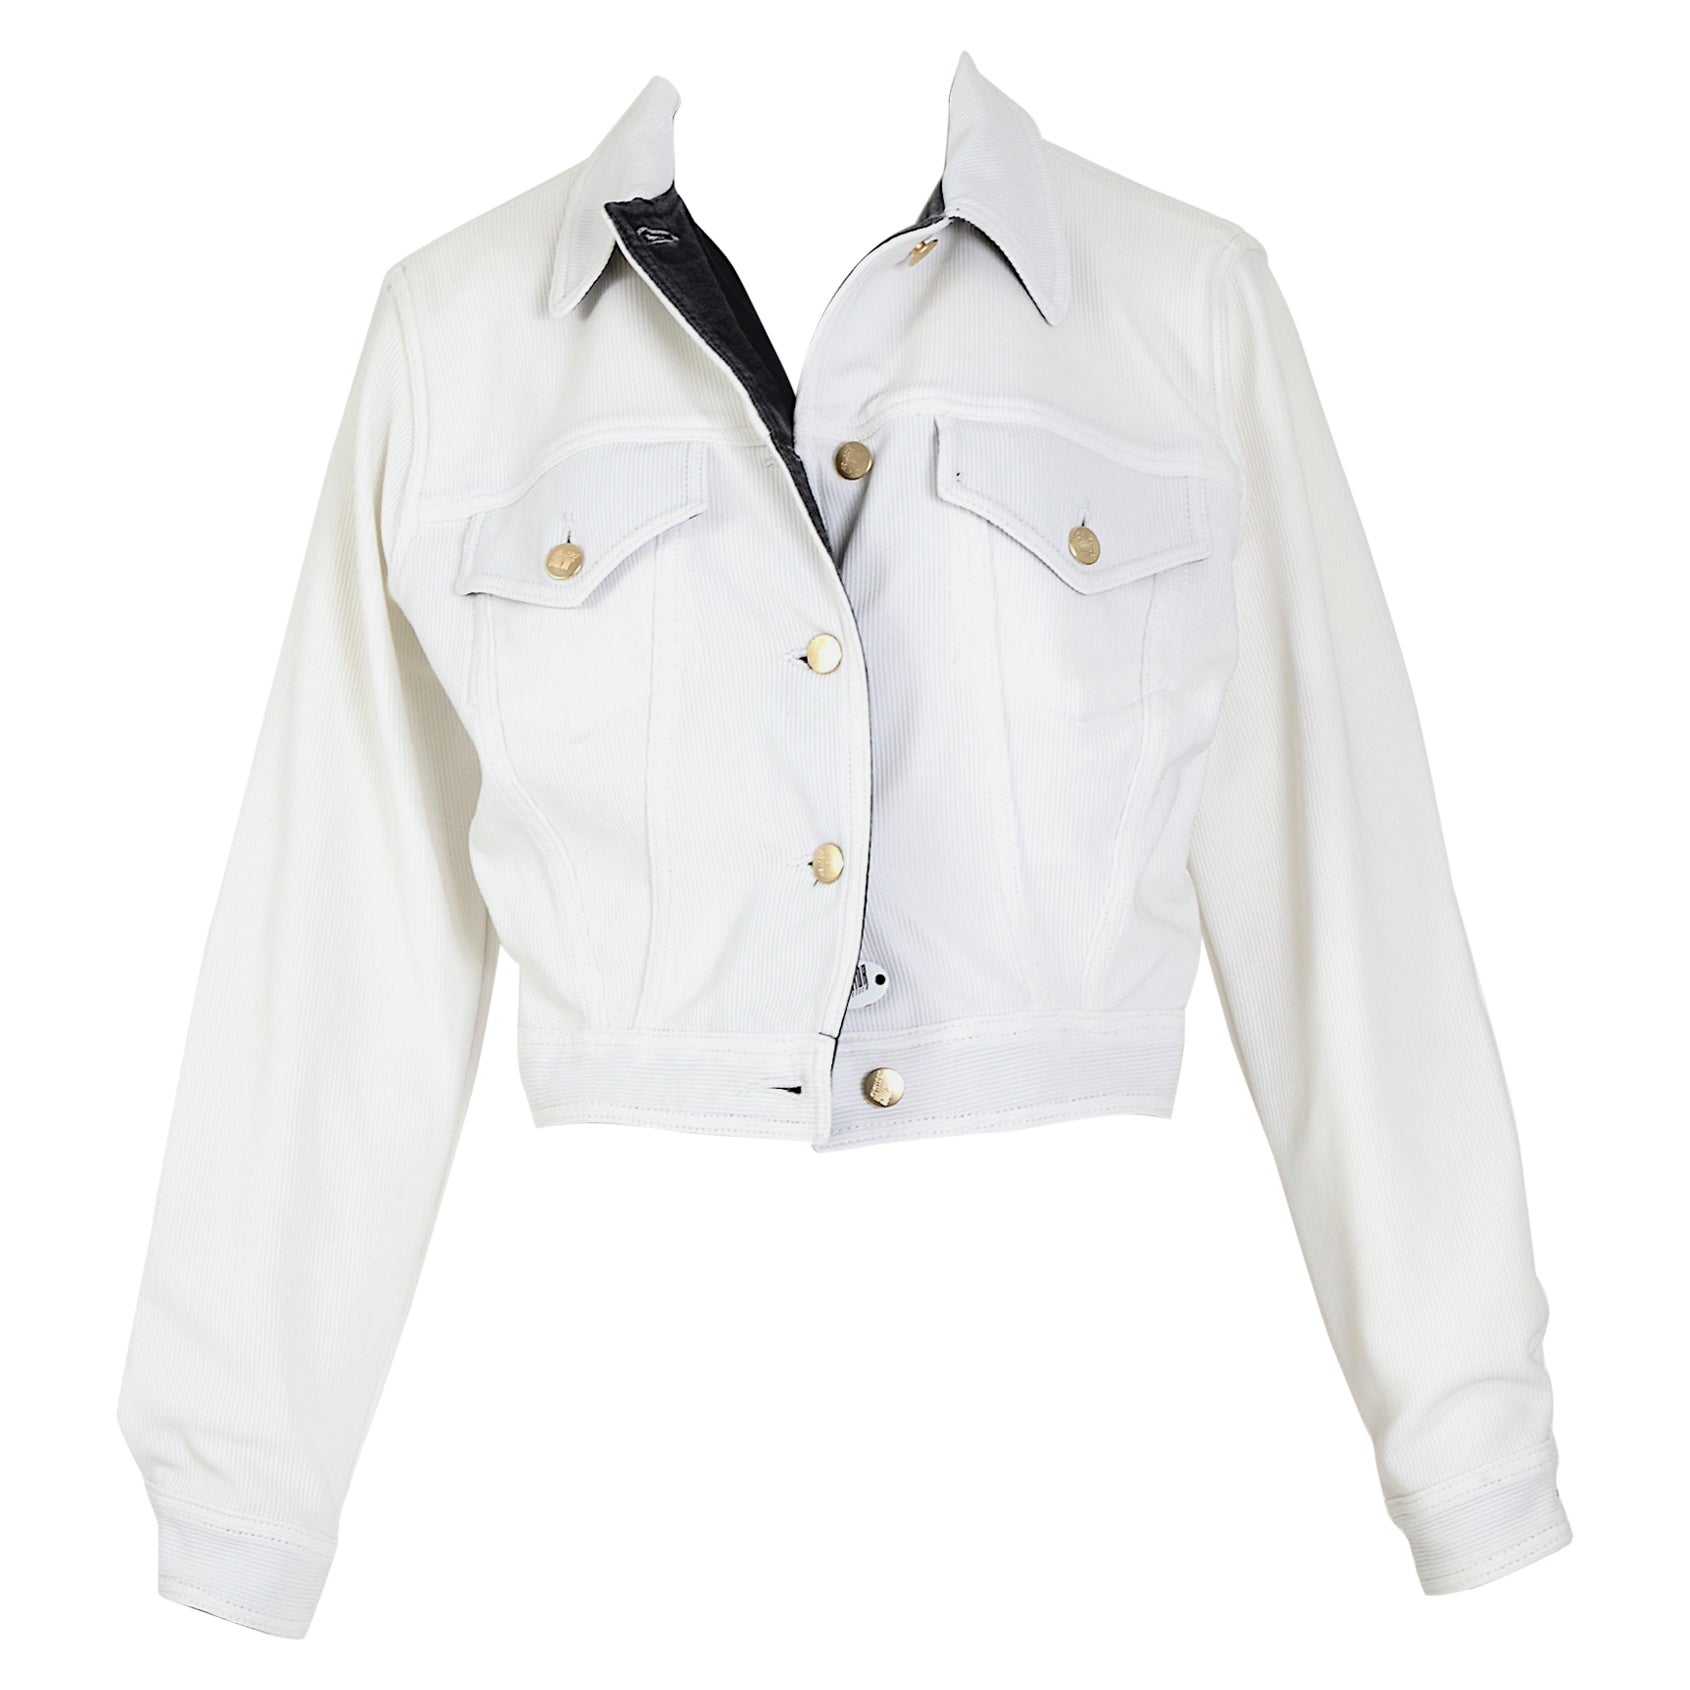 Jean Paul Gaultier junior vintage S/S 1988 white ribbed documented jacket  For Sale